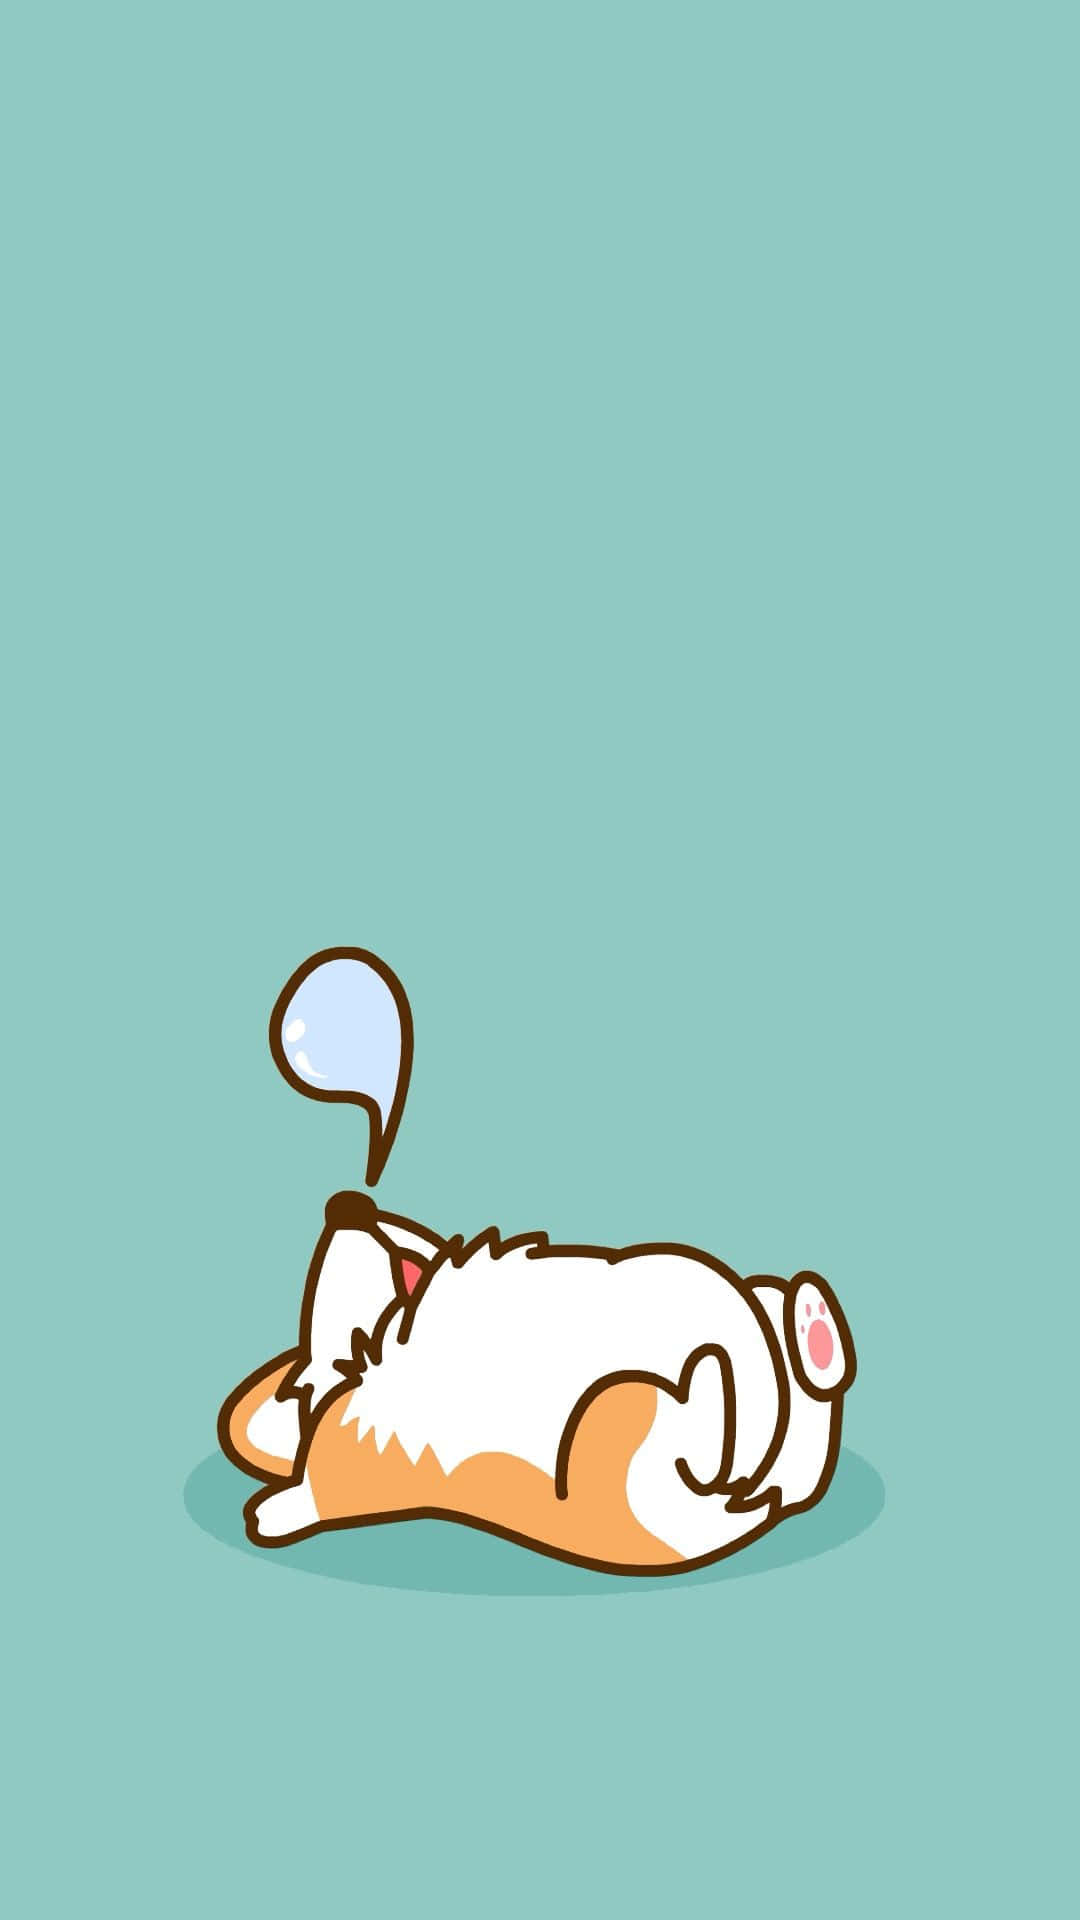 Add life to your phone with this cute animal wallpaper! Wallpaper